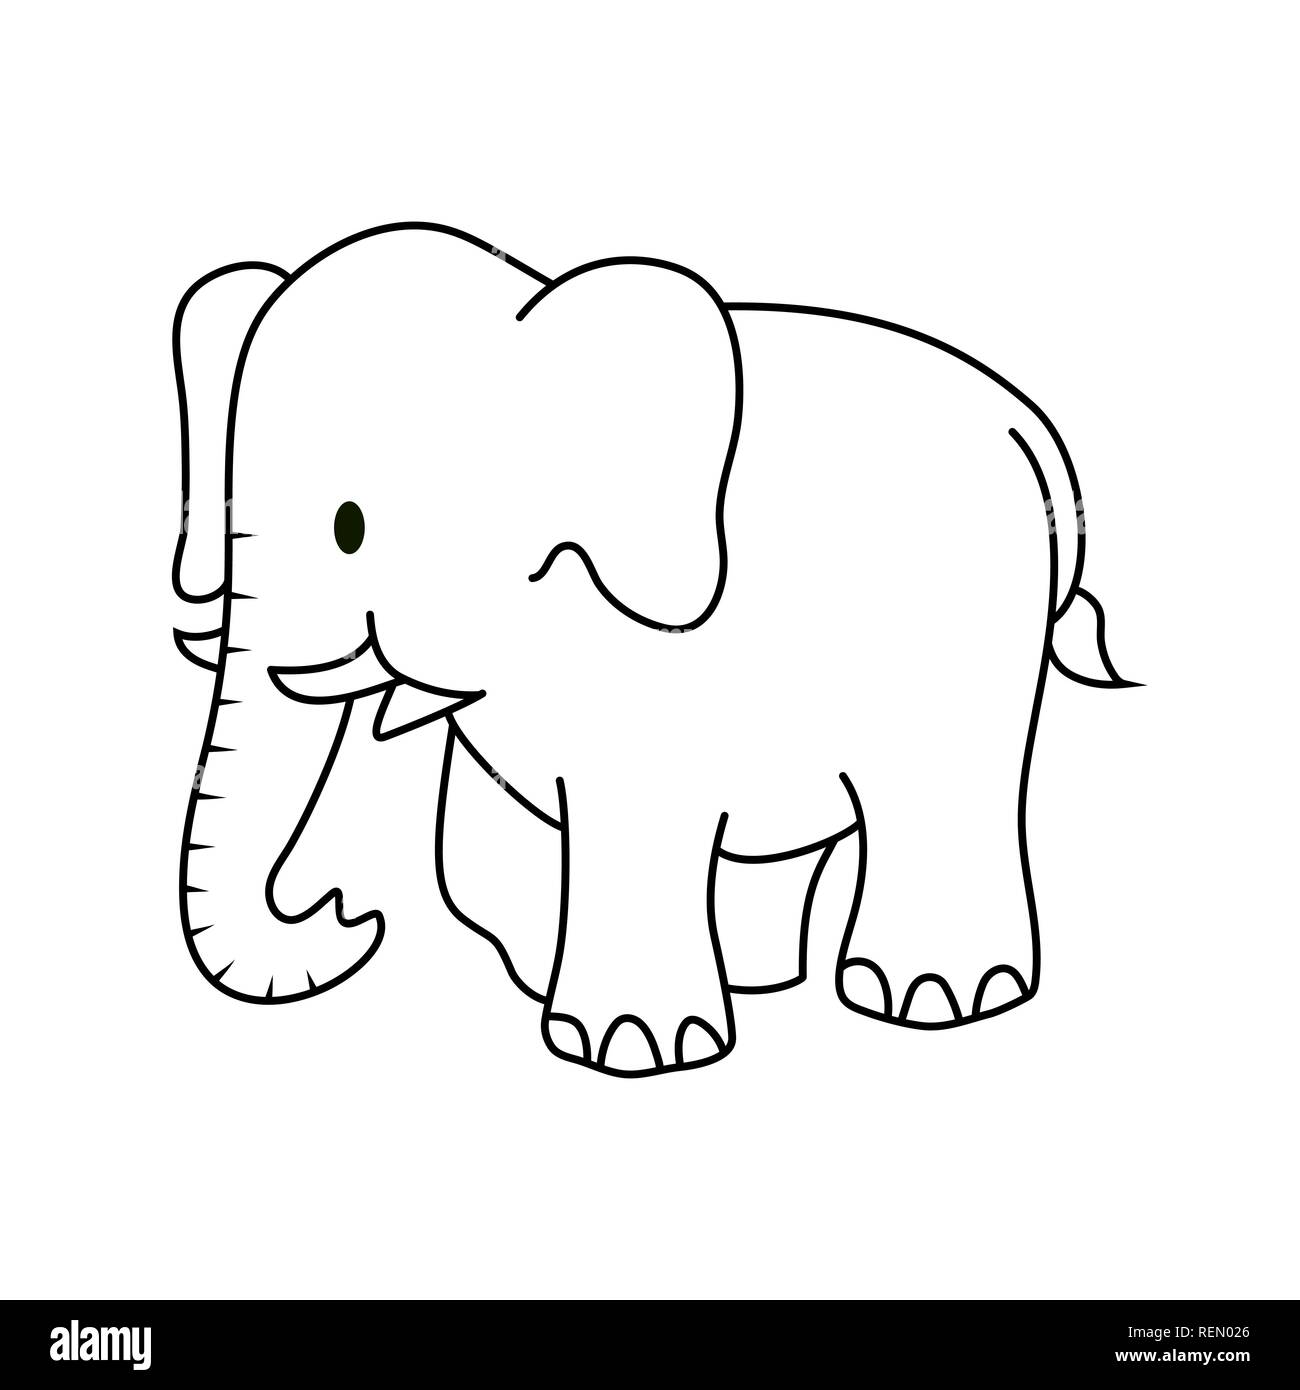 elephant outlines